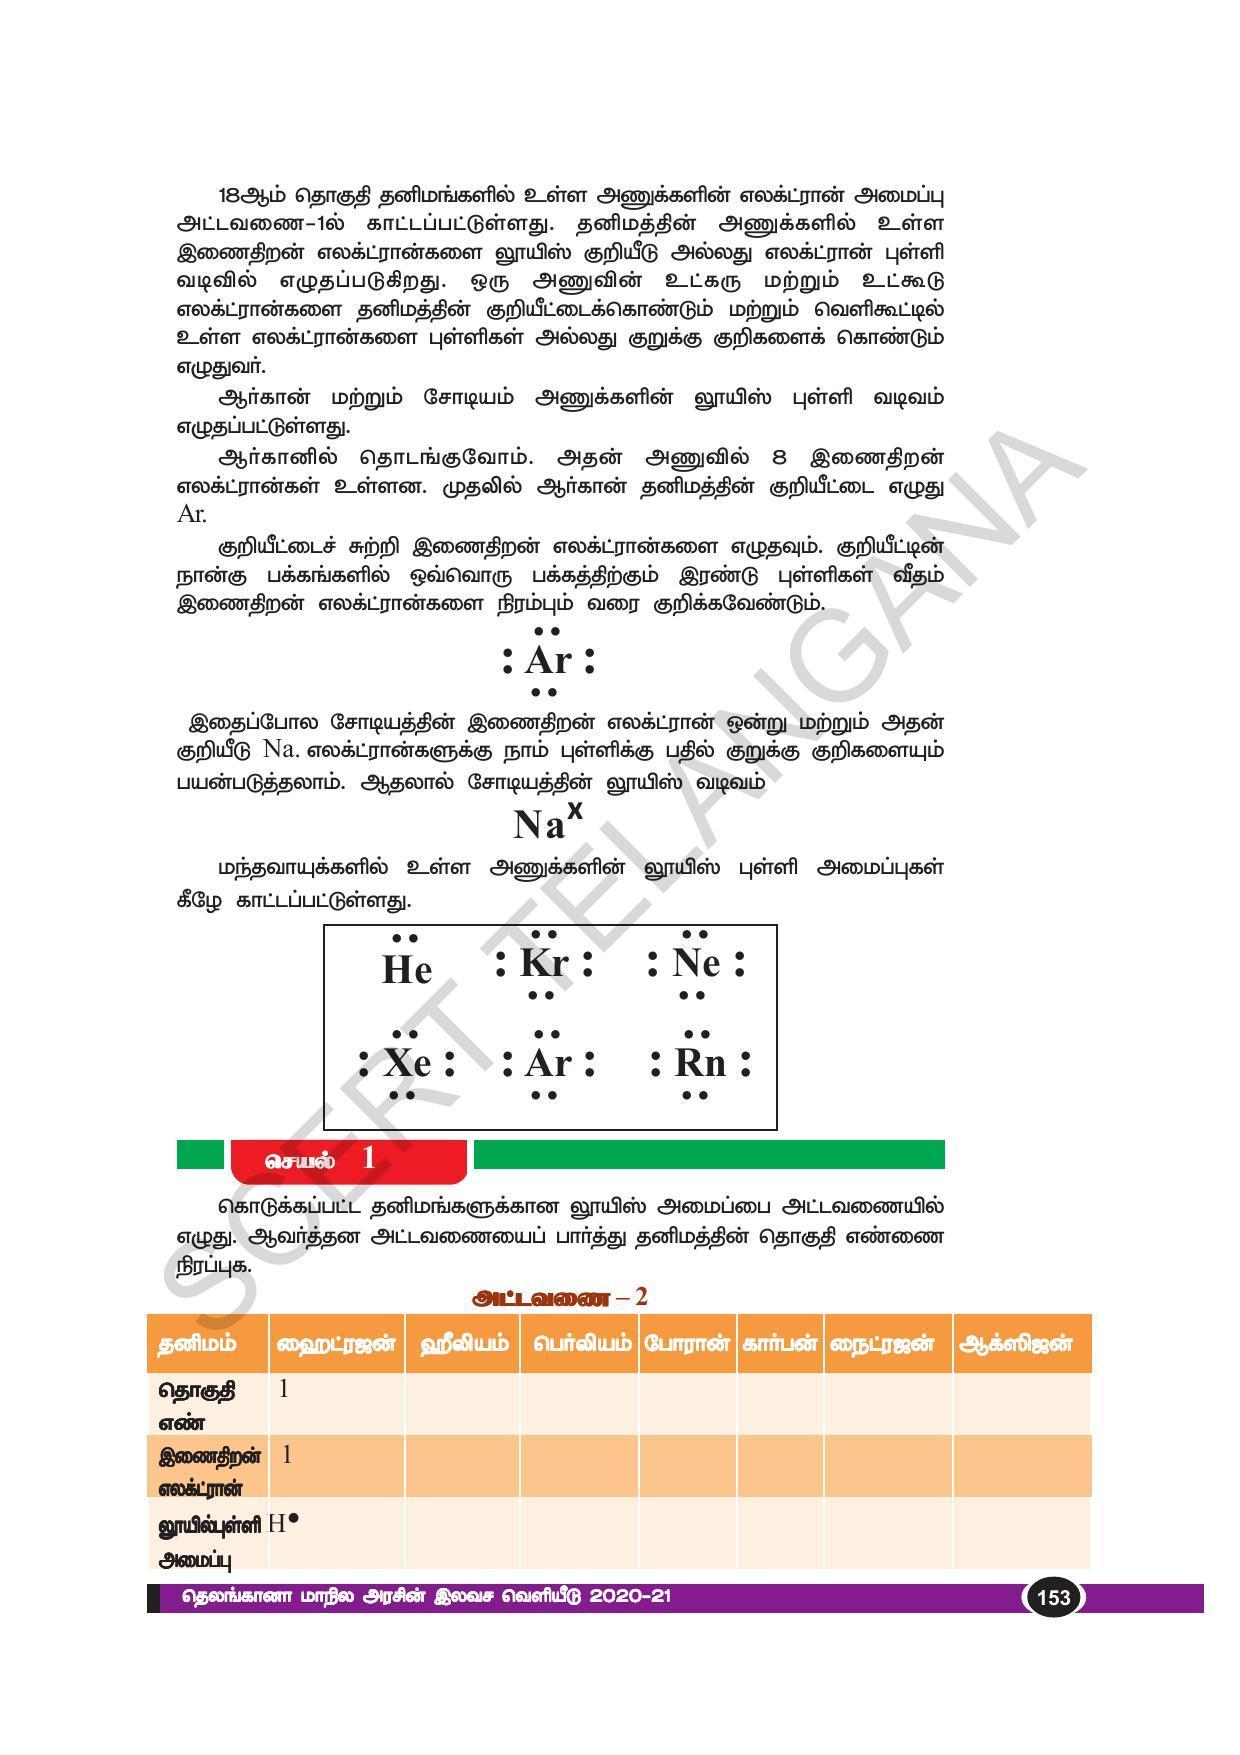 TS SCERT Class 10 Physical Science(Tamil Medium) Text Book - Page 165